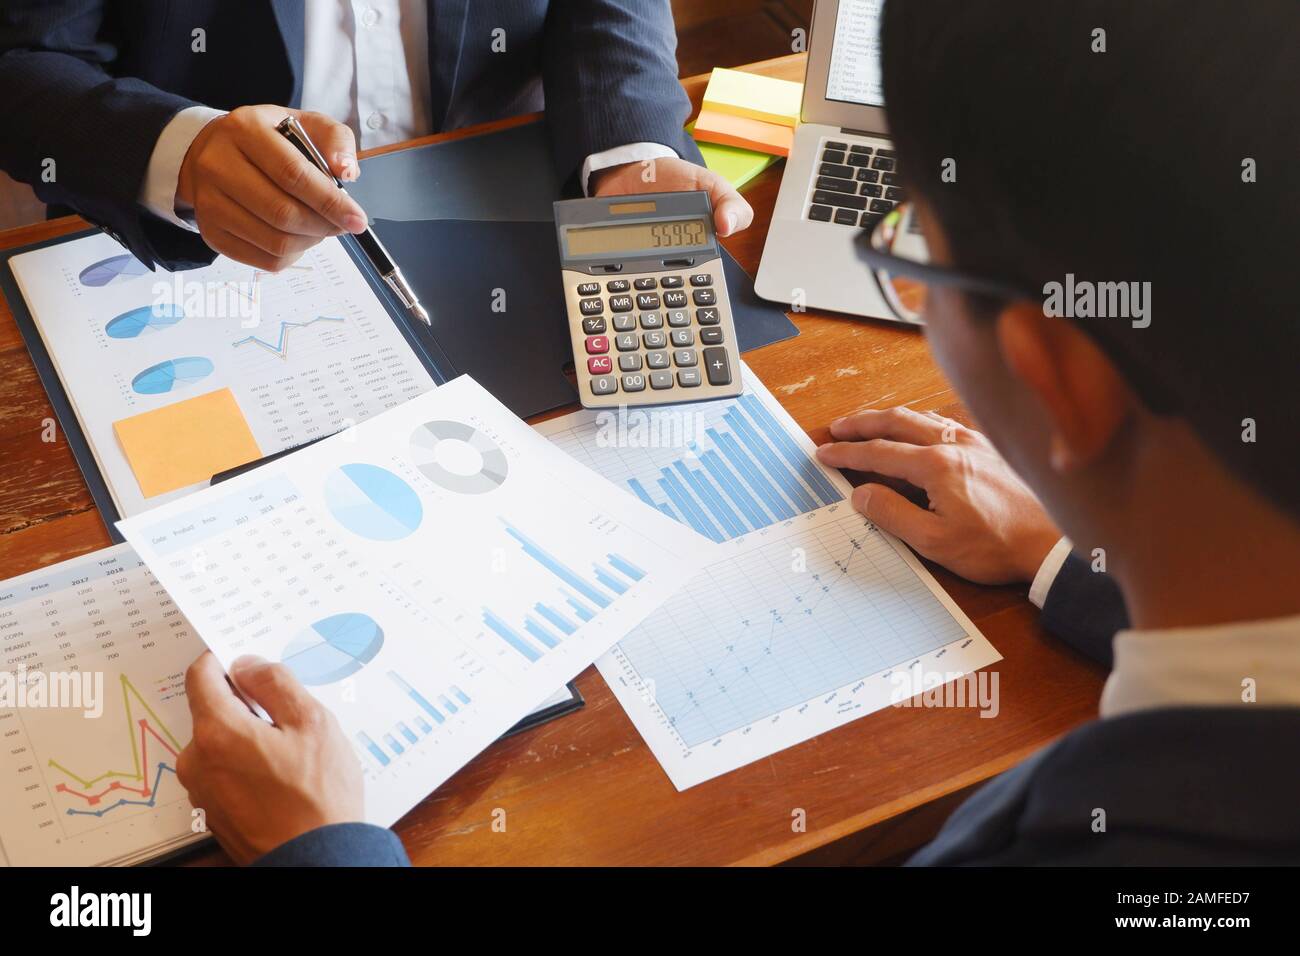 Business Consulting Business Businessman Meeting Brainstorming Report Project Analyze. Stockfoto